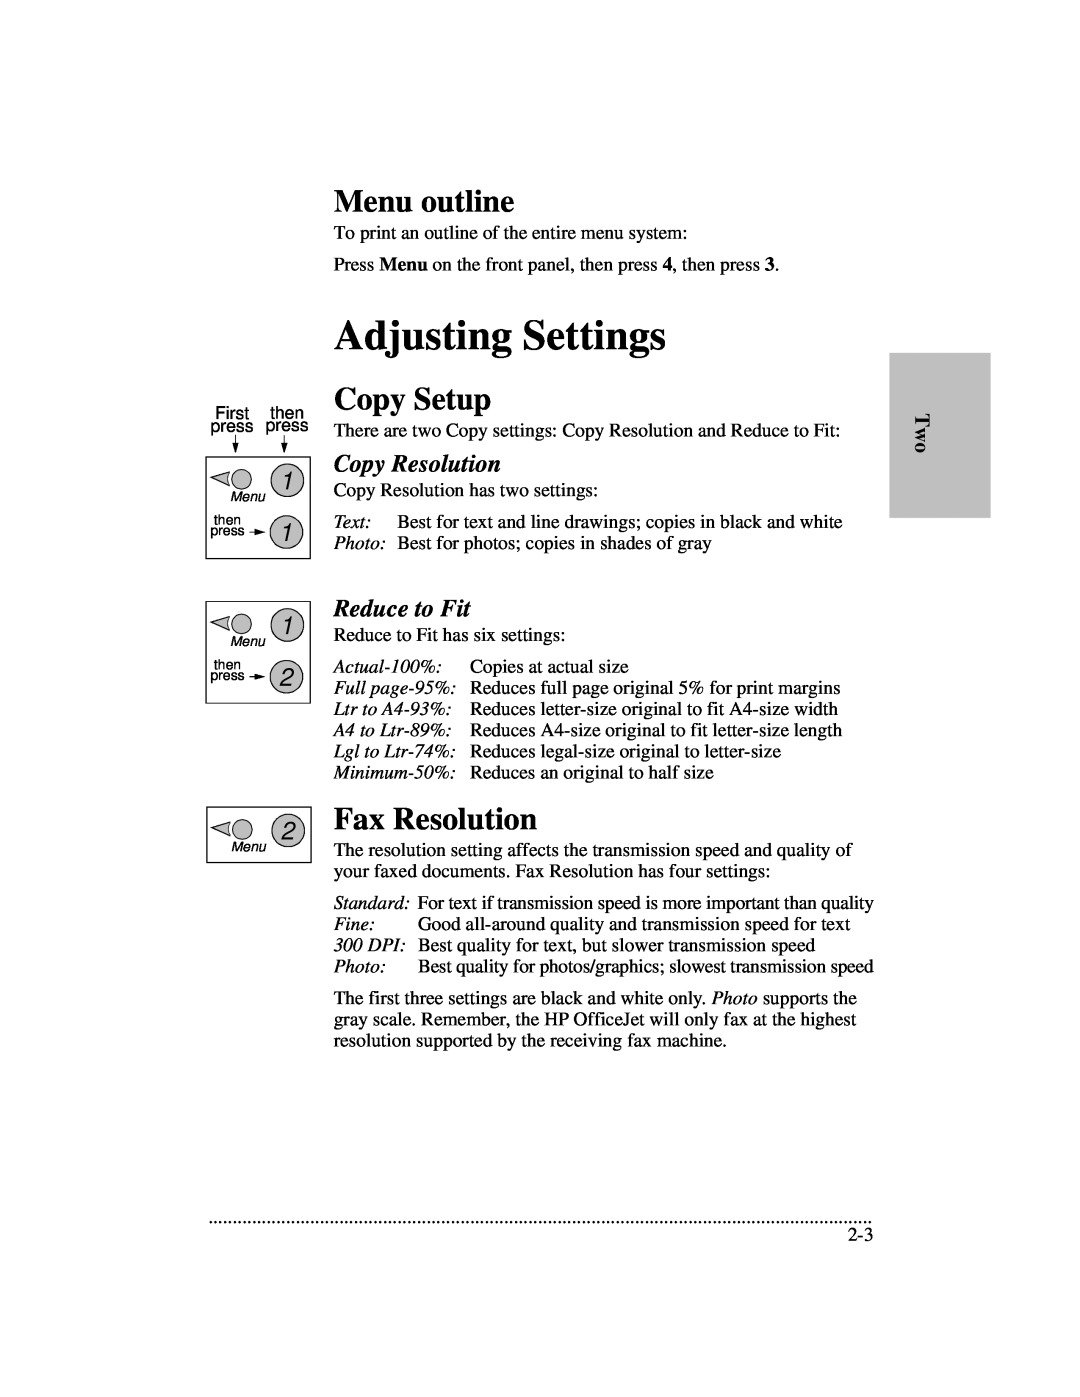 HP 700 manual Adjusting Settings, Menu outline, Copy Setup, Fax Resolution, Copy Resolution, Reduce to Fit 